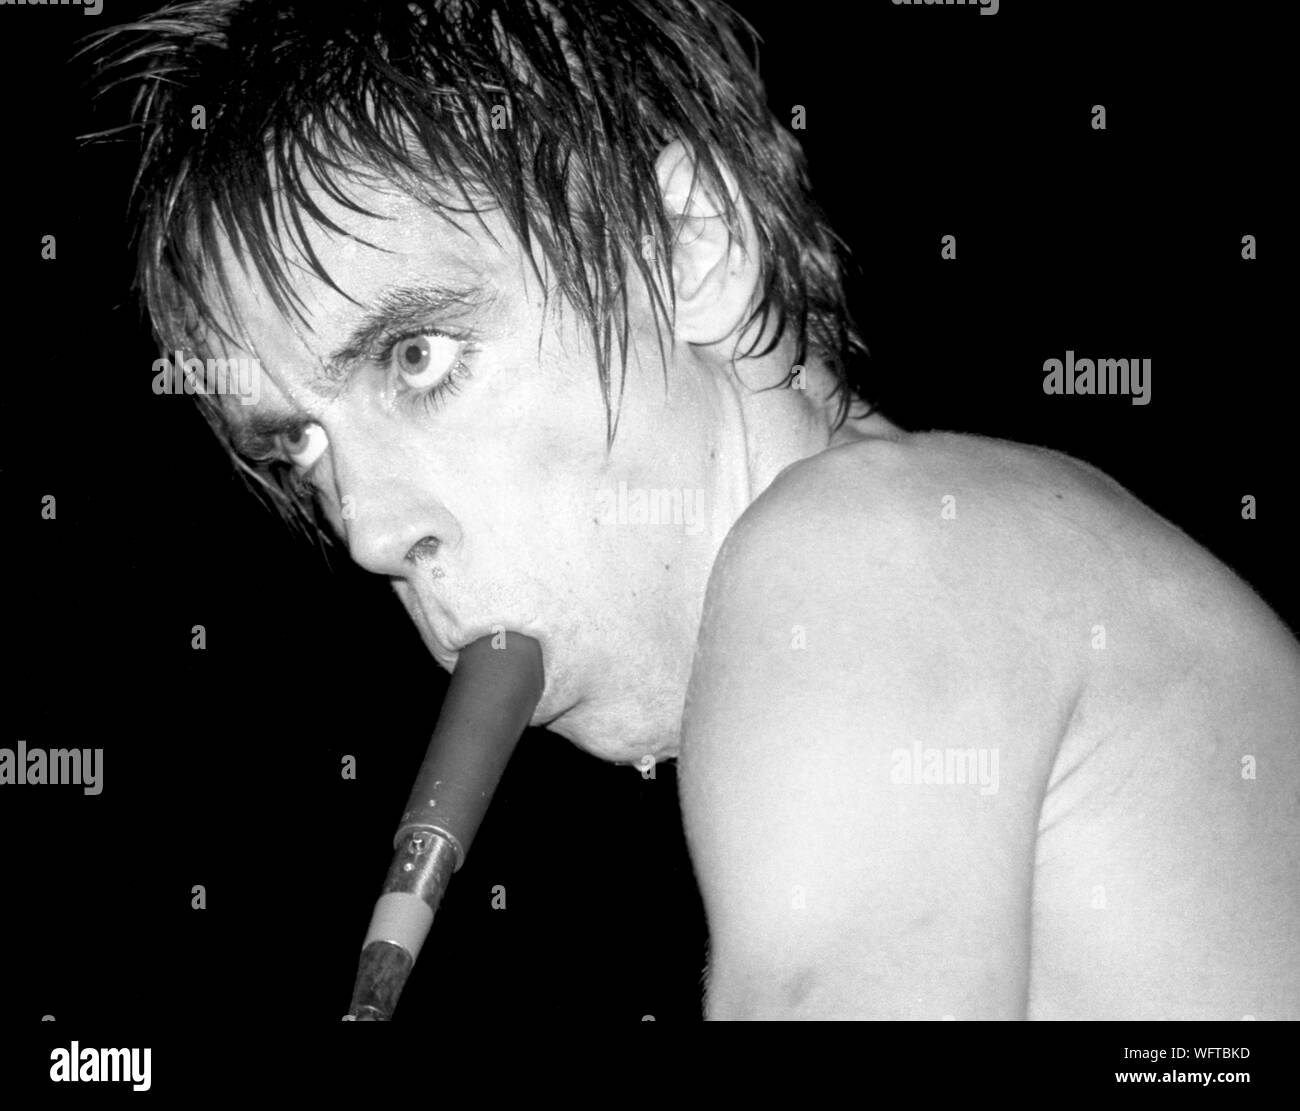 Iggy Pop performs onstage at the Palladium theater in New York City in November 1977 with a microphone in his mouth. Stock Photo